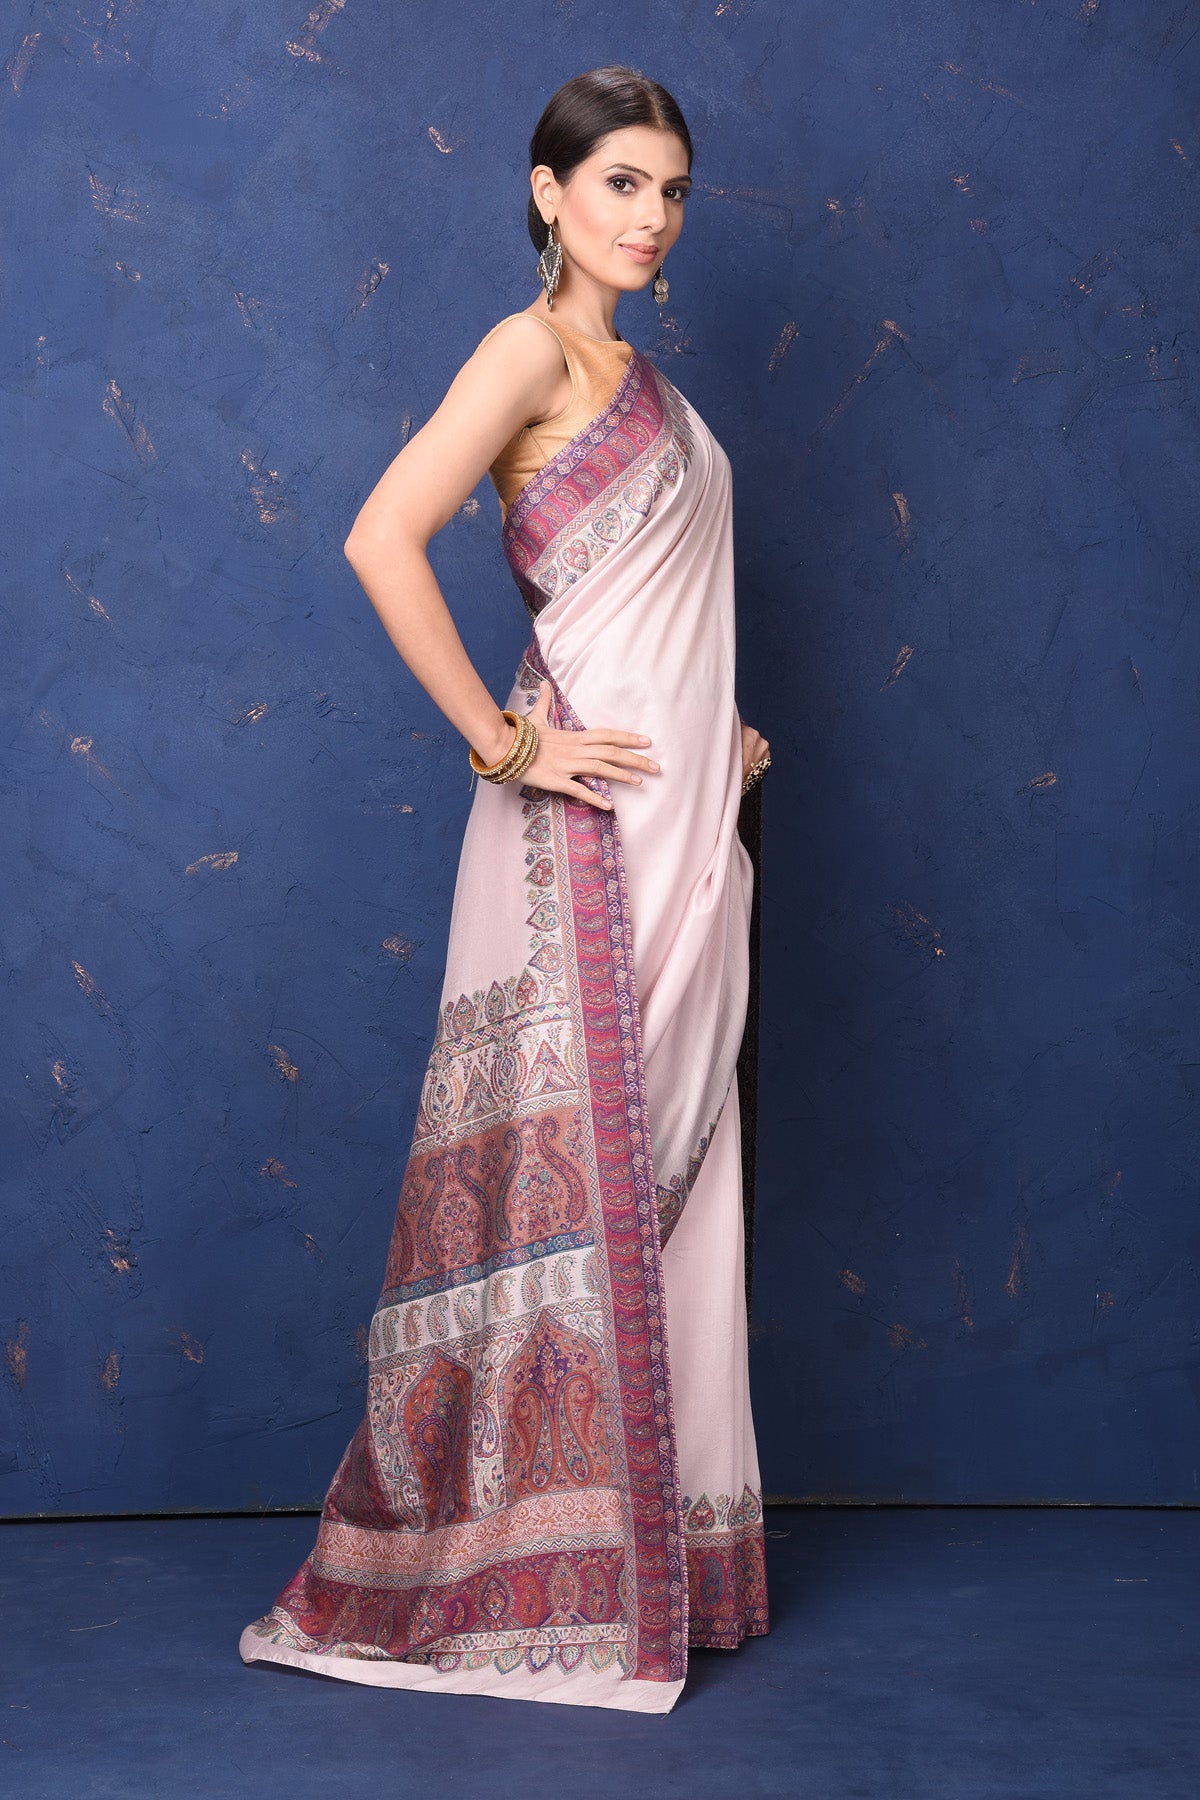 Buy stunning cream tussar muga silk saree online in USA with Kani border. Buy latest designer sarees, handloom saris, embroidered sarees, Bollywood sarees, fancy sarees for special occasions from Pure Elegance Indian fashion store in USA. Shop soft silk sarees, pure Banarasi sarees, cotton sarees, georgette sarees. -side